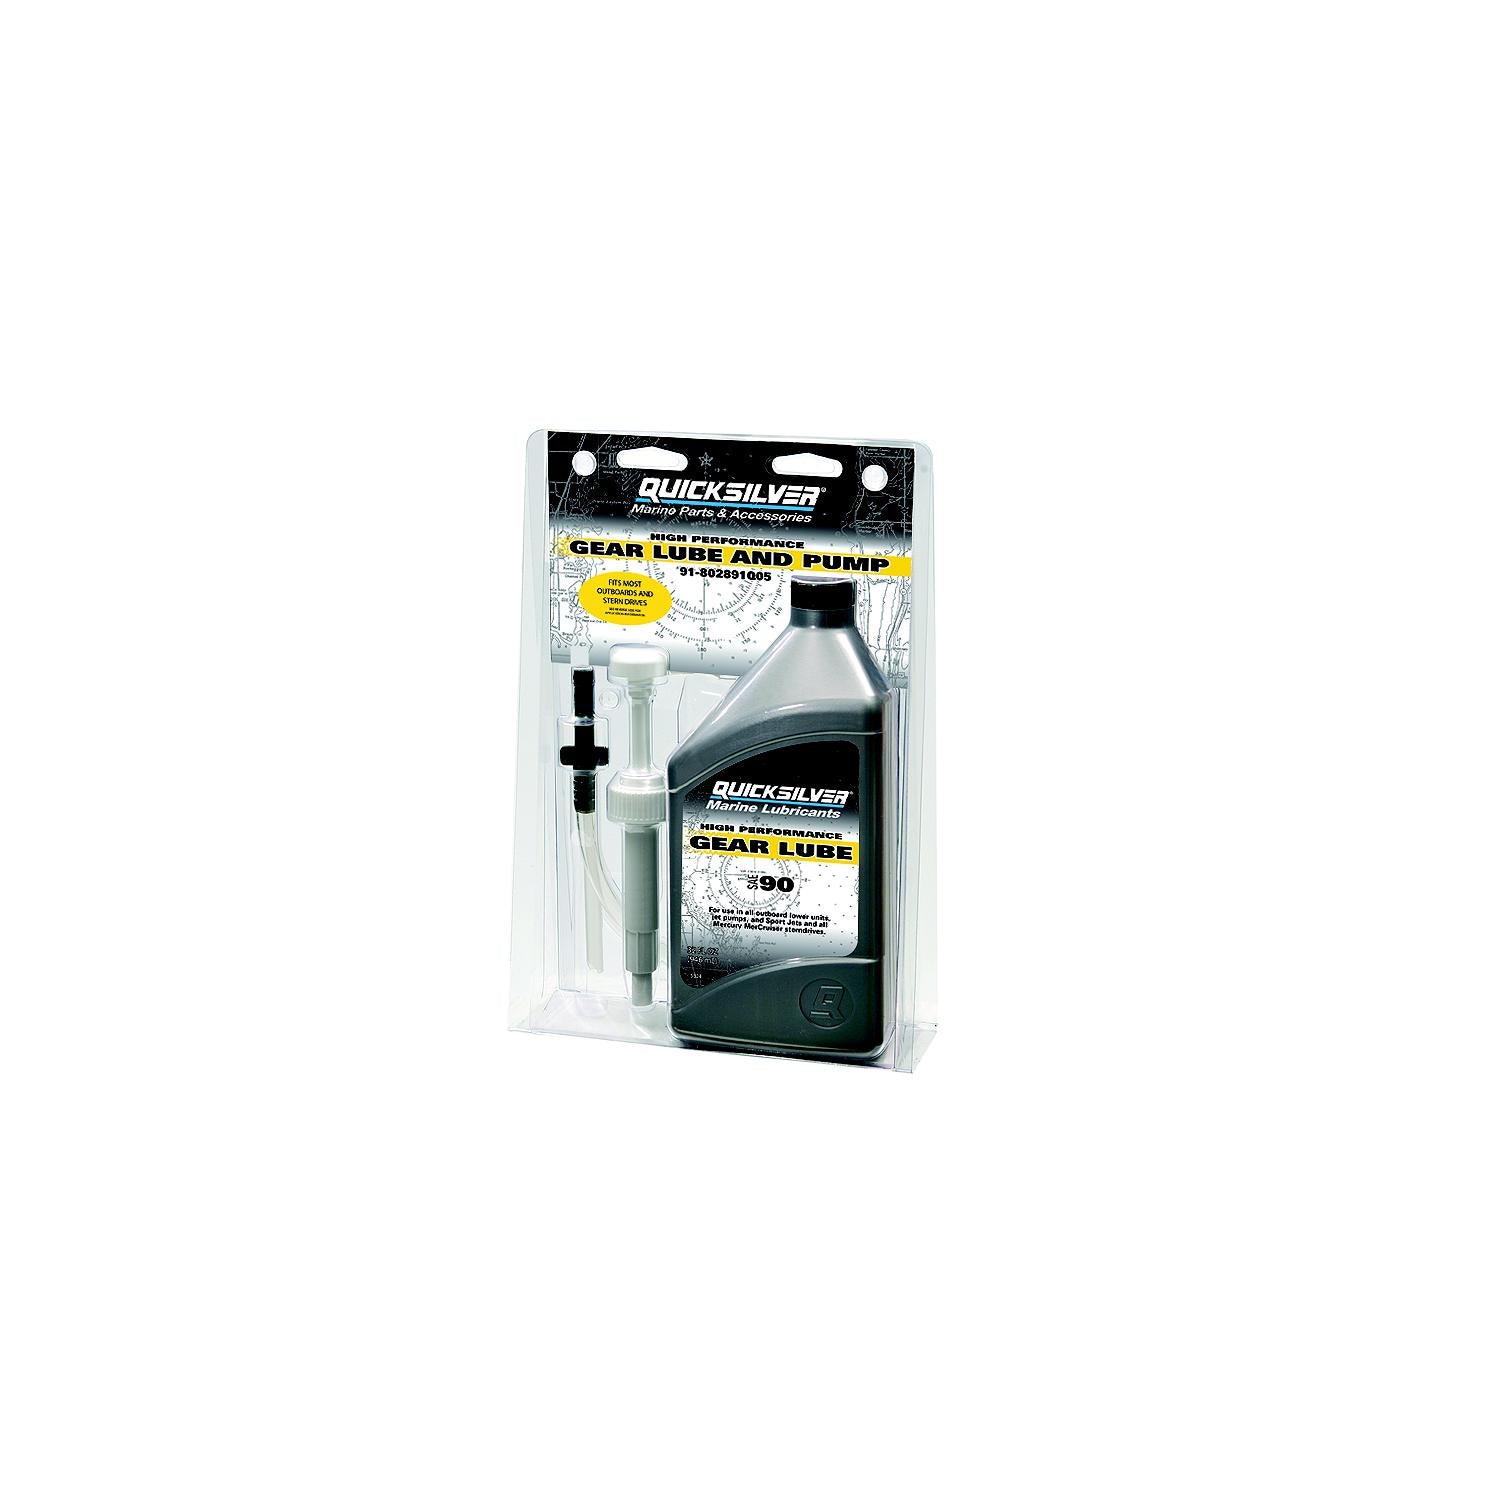 Quicksilver SAE 90 High Performance Gear Lube and Pump Kit - 32 Oz.